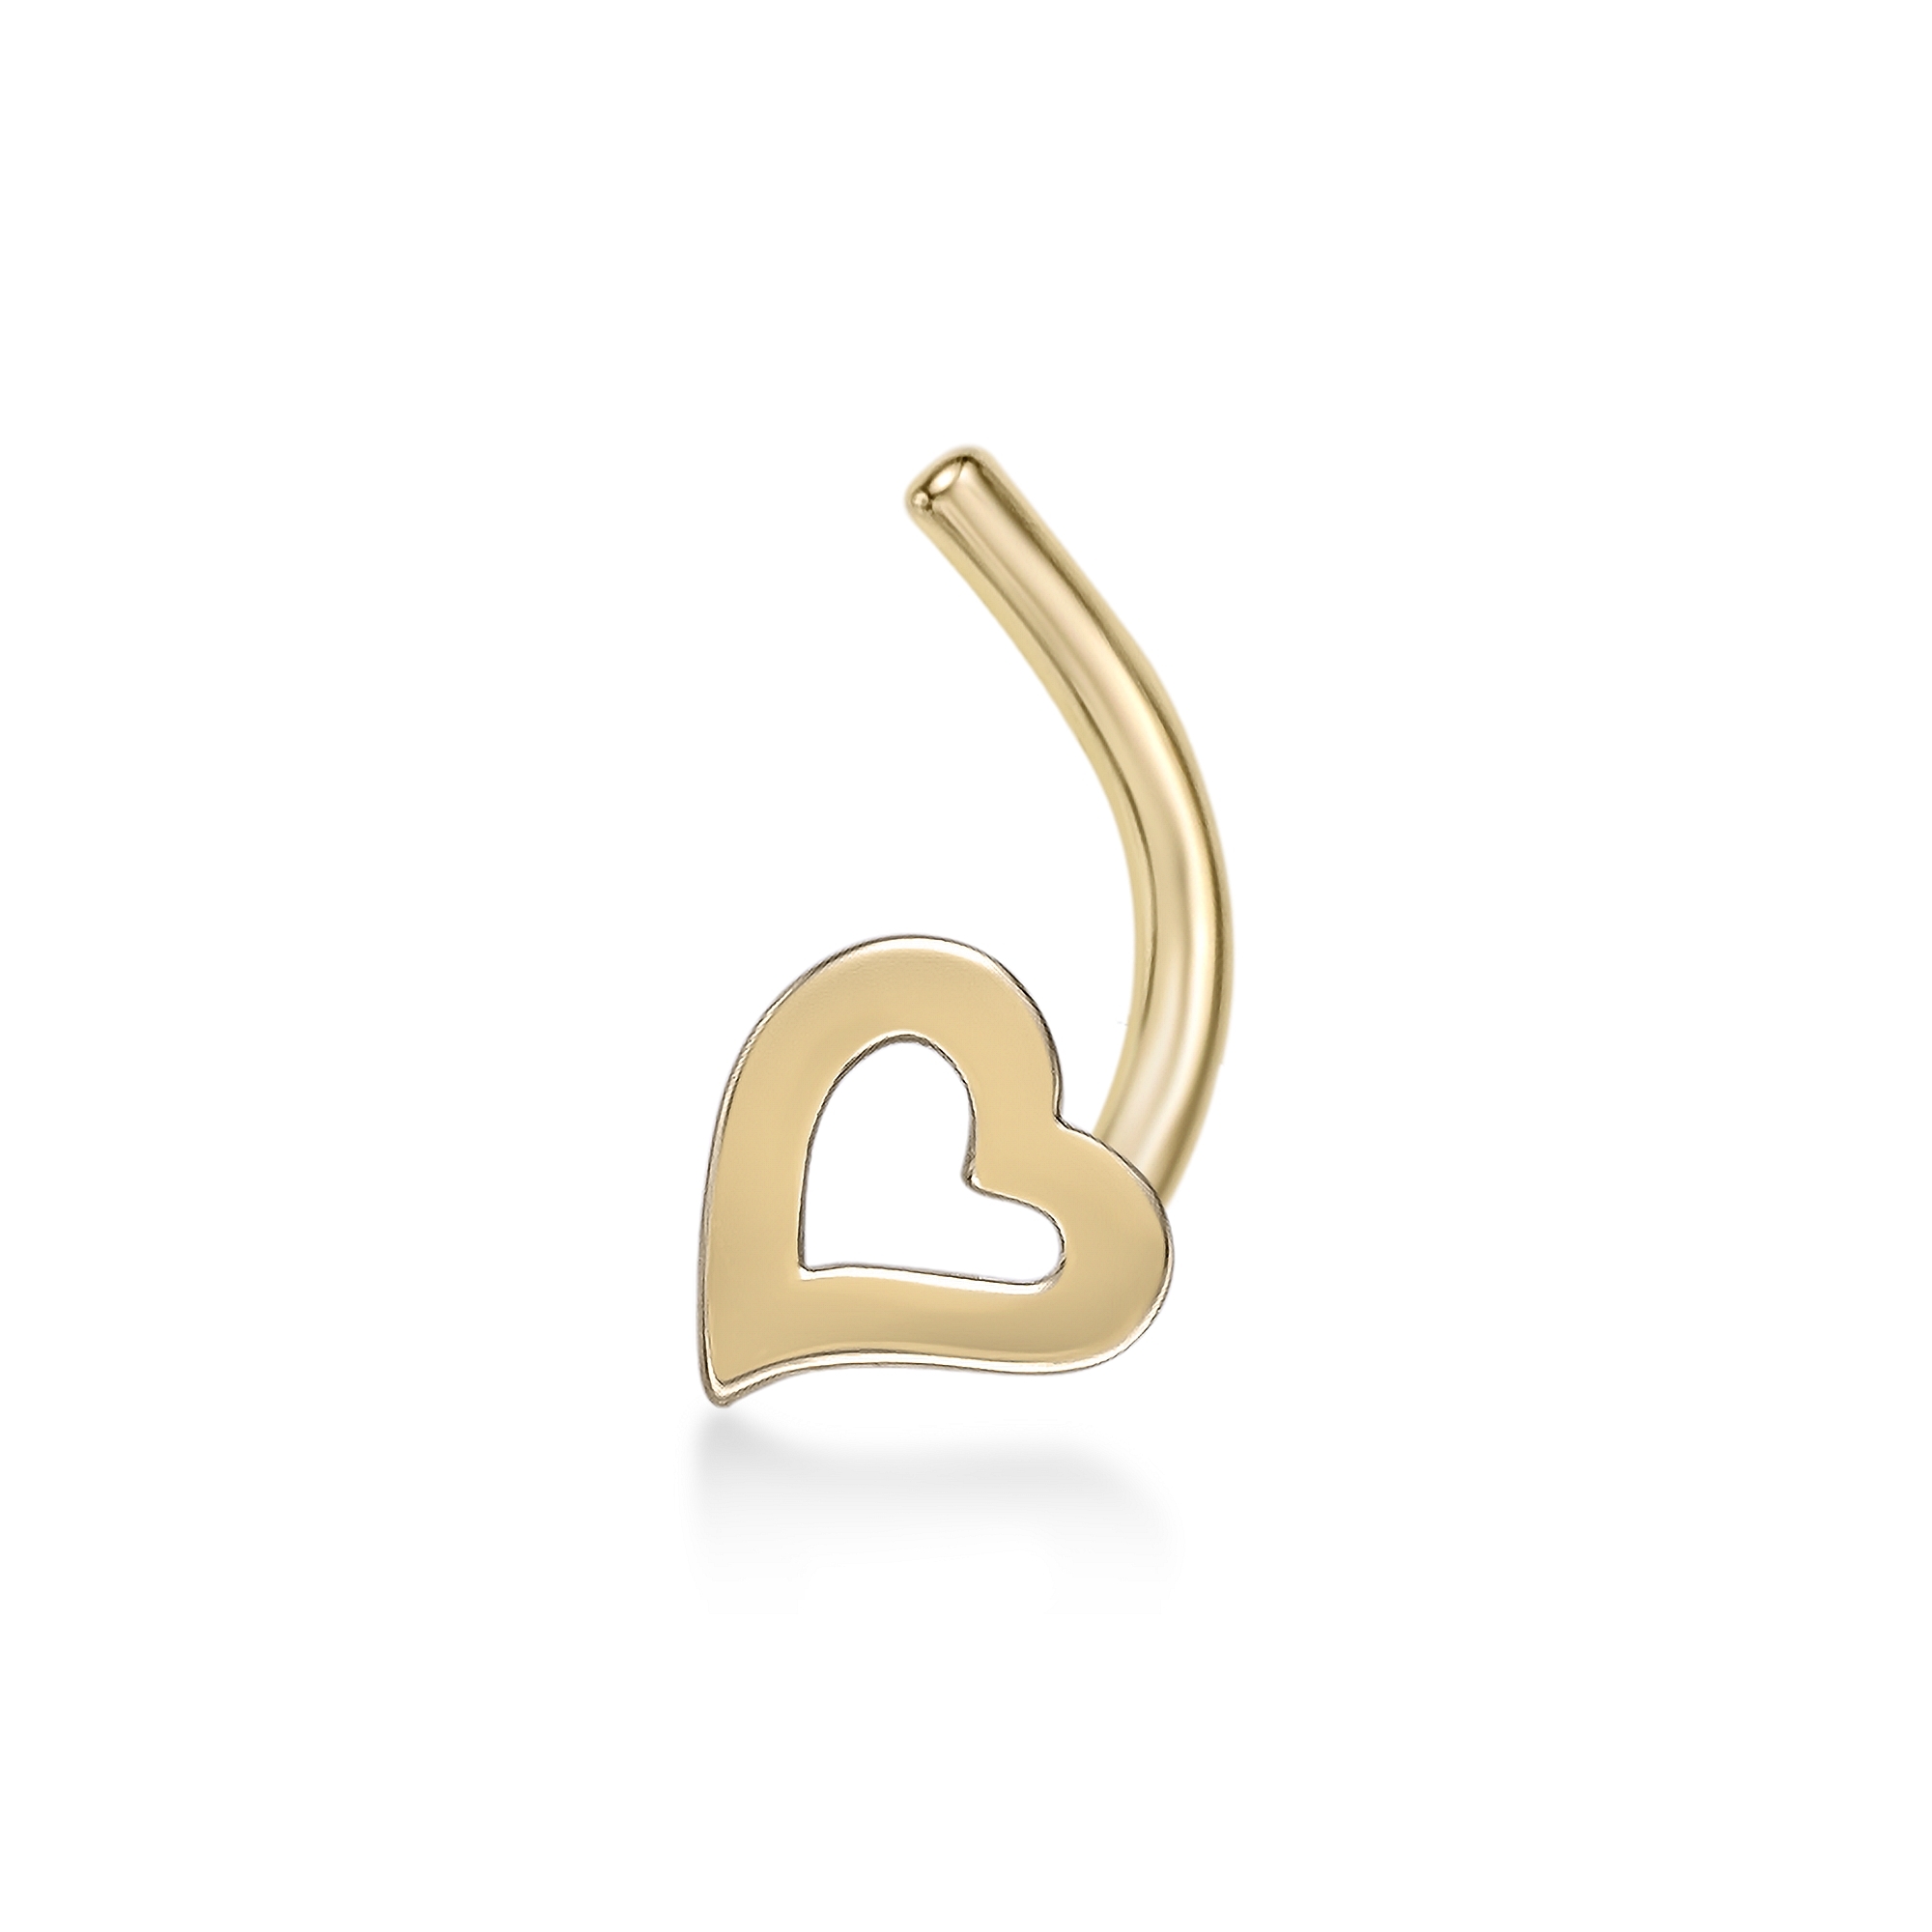 52373-nose-ring-default-collection-yellow-gold-52373-2.jpg